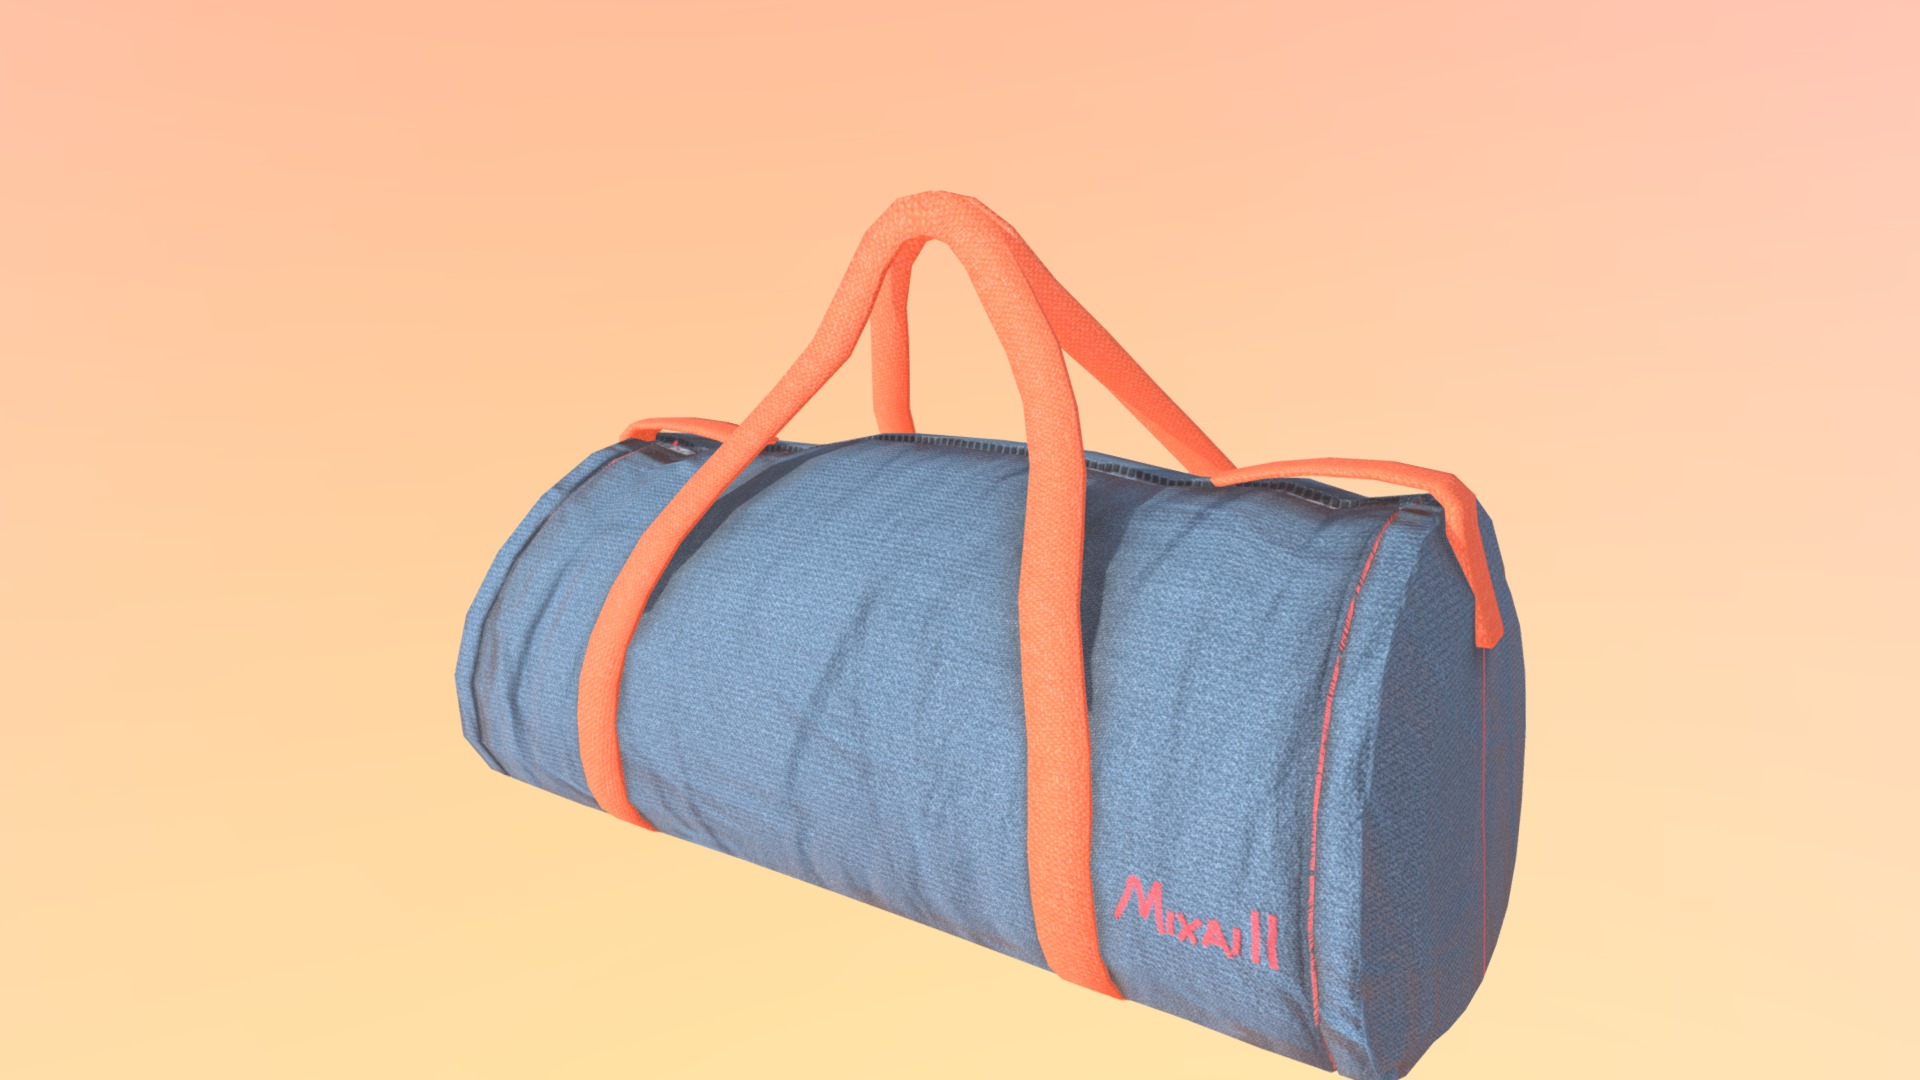 3D model Bag - This is a 3D model of the Bag. The 3D model is about a blue and orange bag.